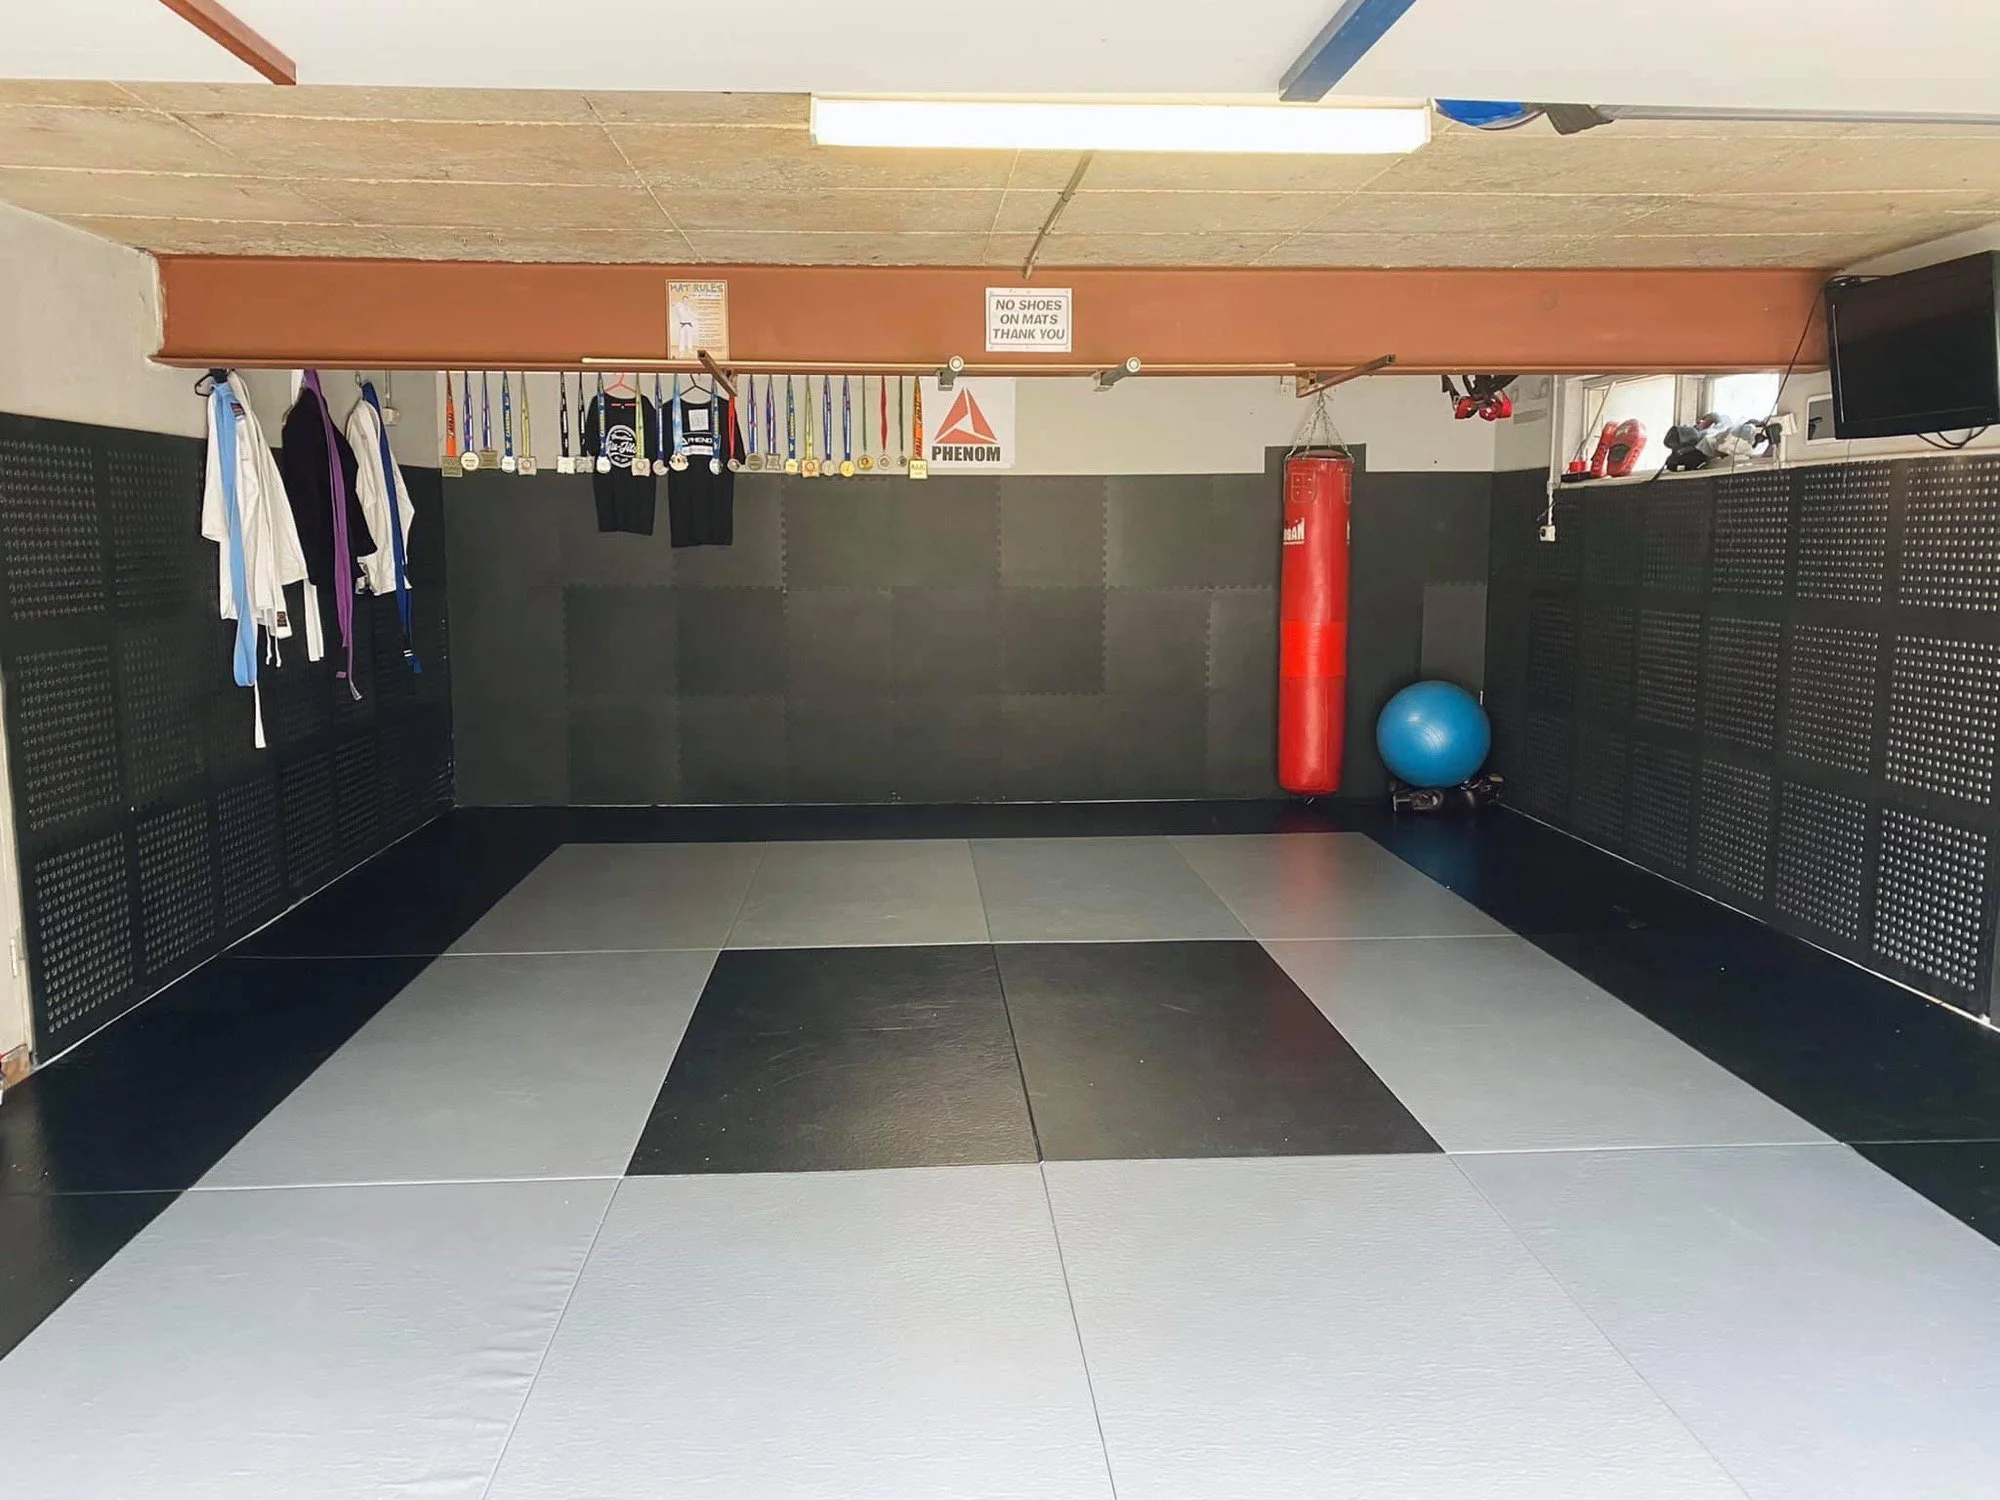 Training Mat Supplier and Products